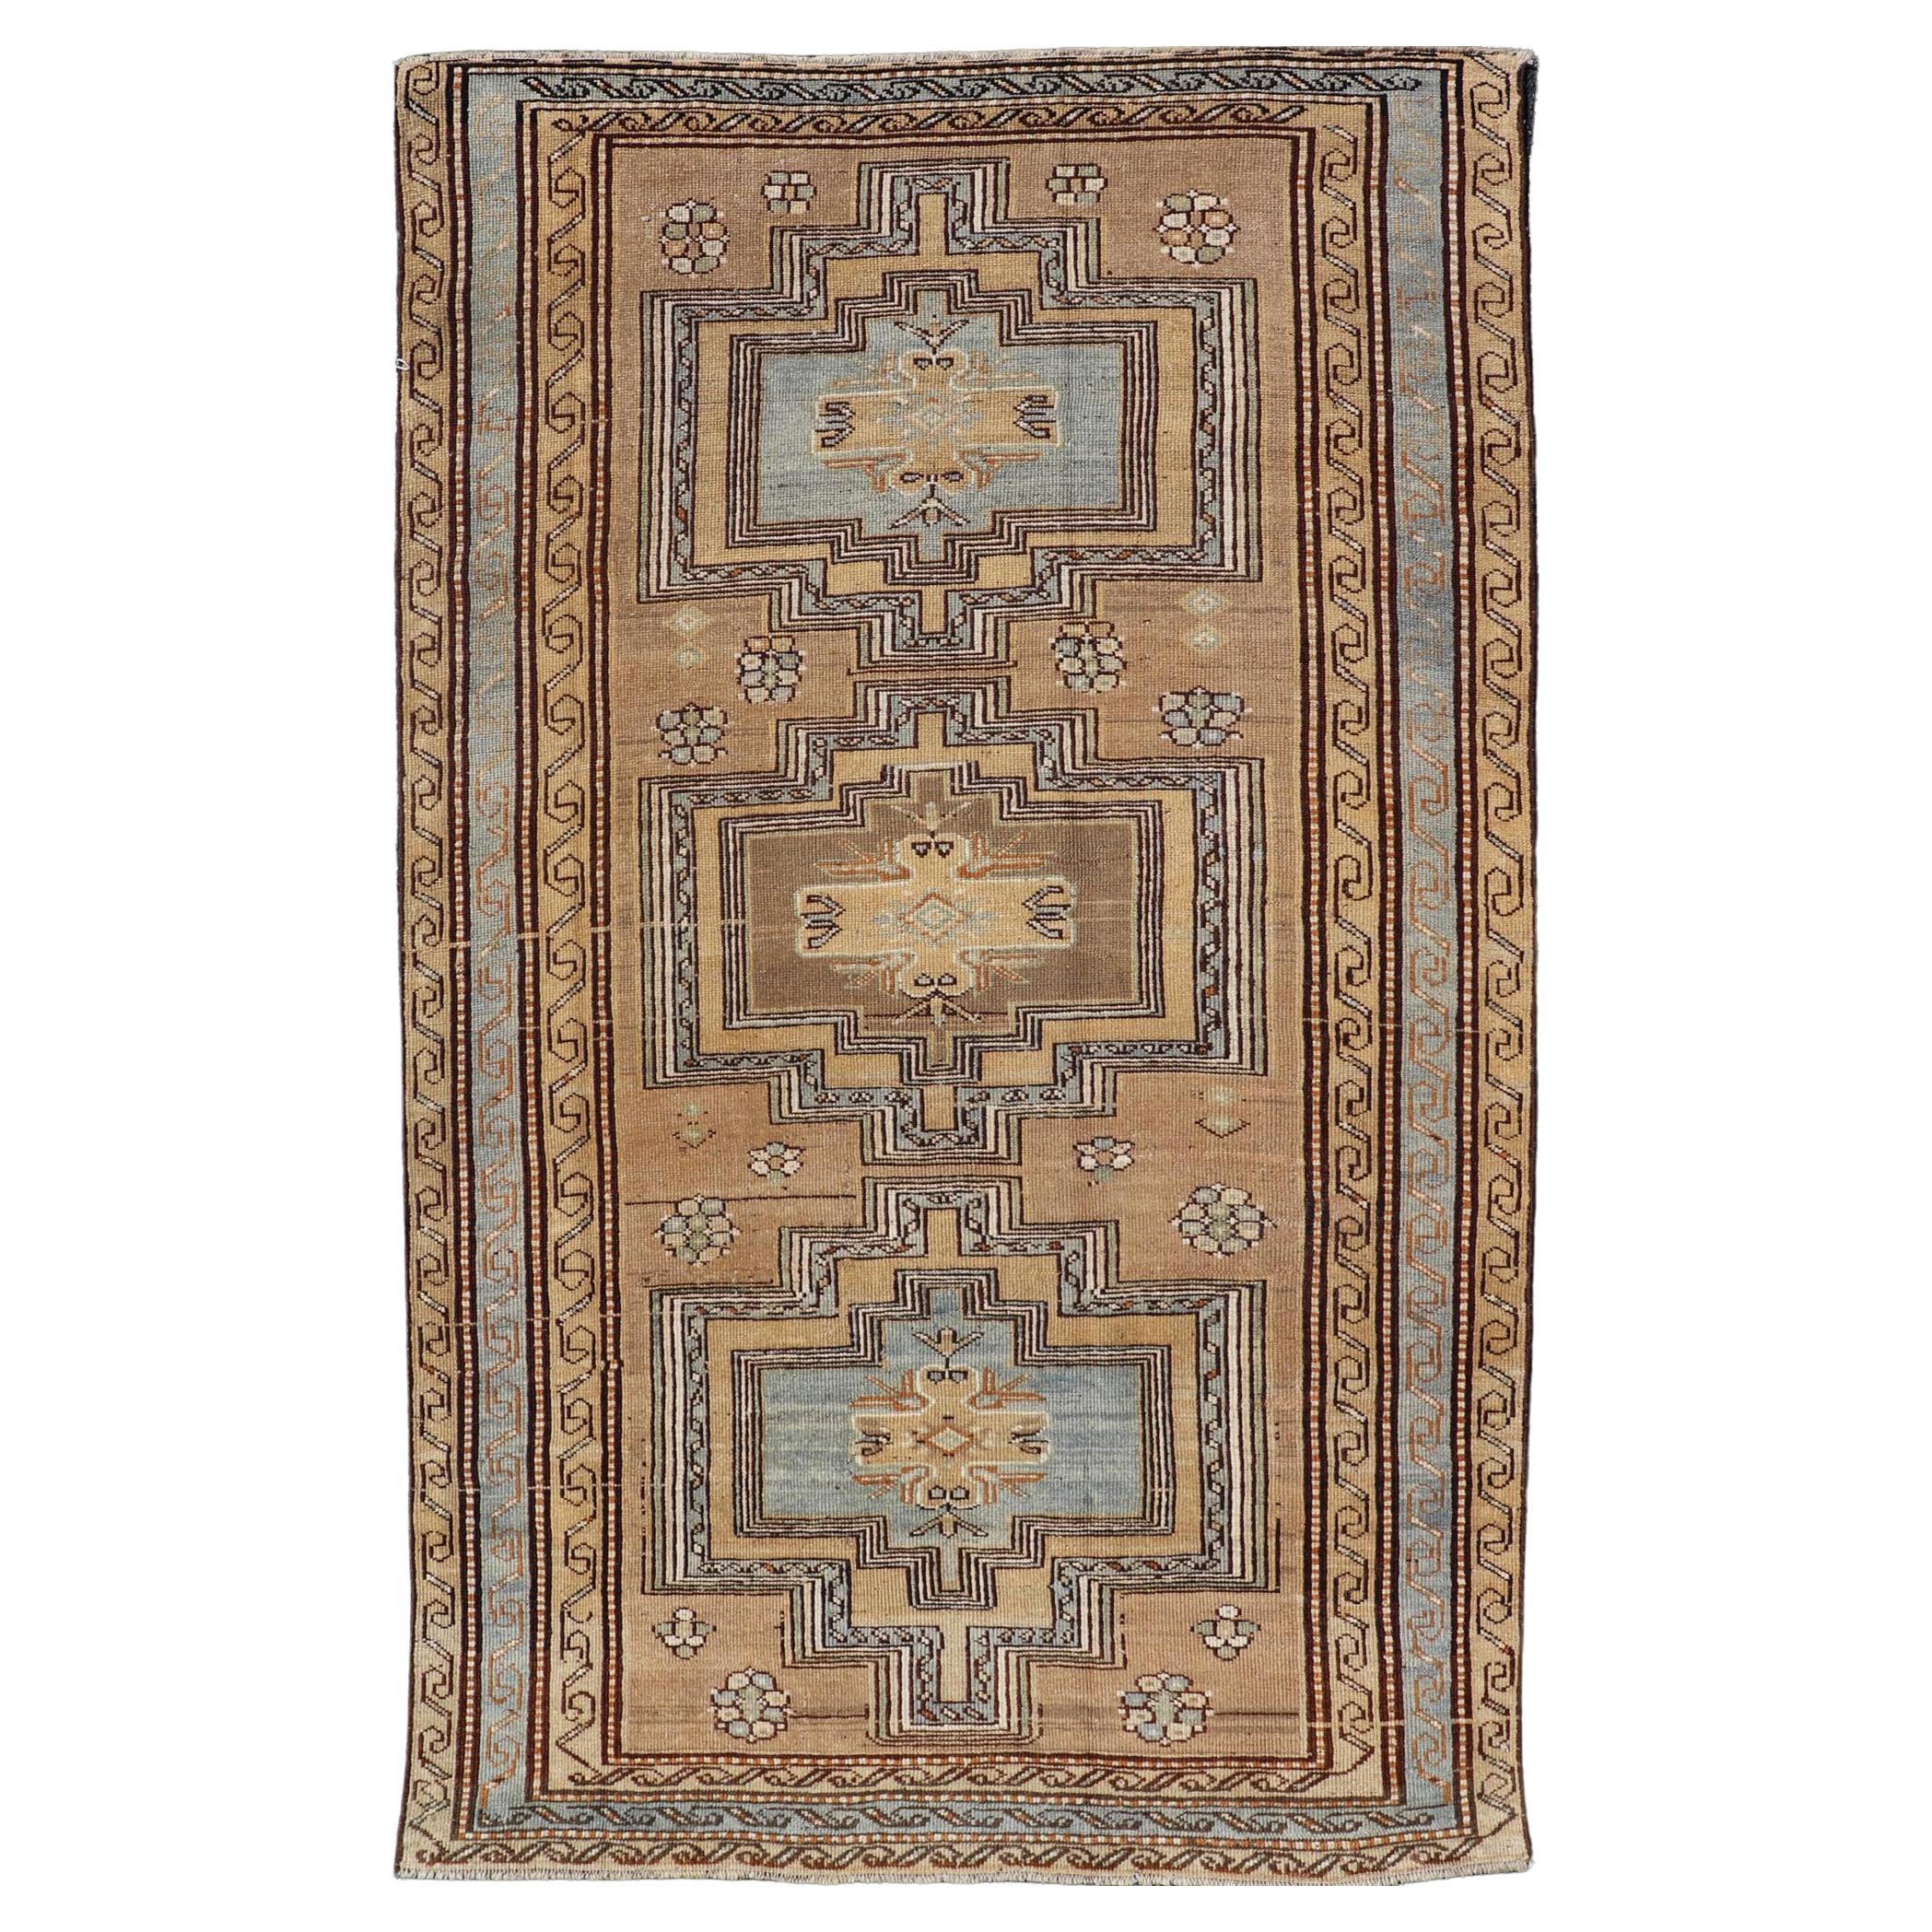 Antique Persian Kurdish Rug in Wool with Tri-Medallion Design in Brown and Blue